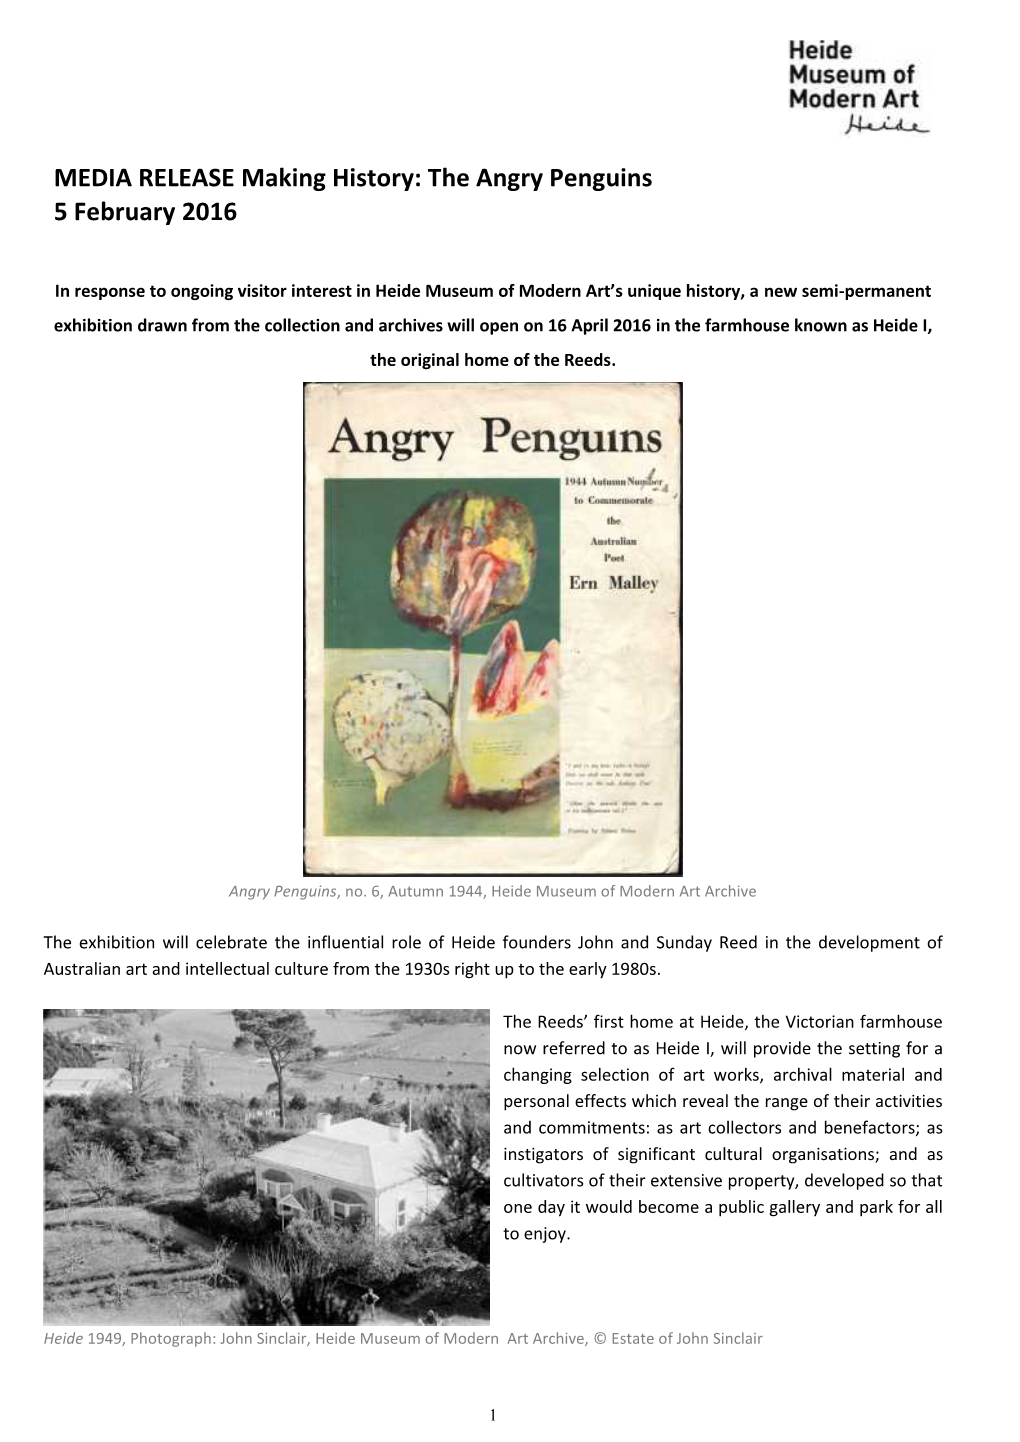 MEDIA RELEASE Making History: the Angry Penguins 5 February 2016